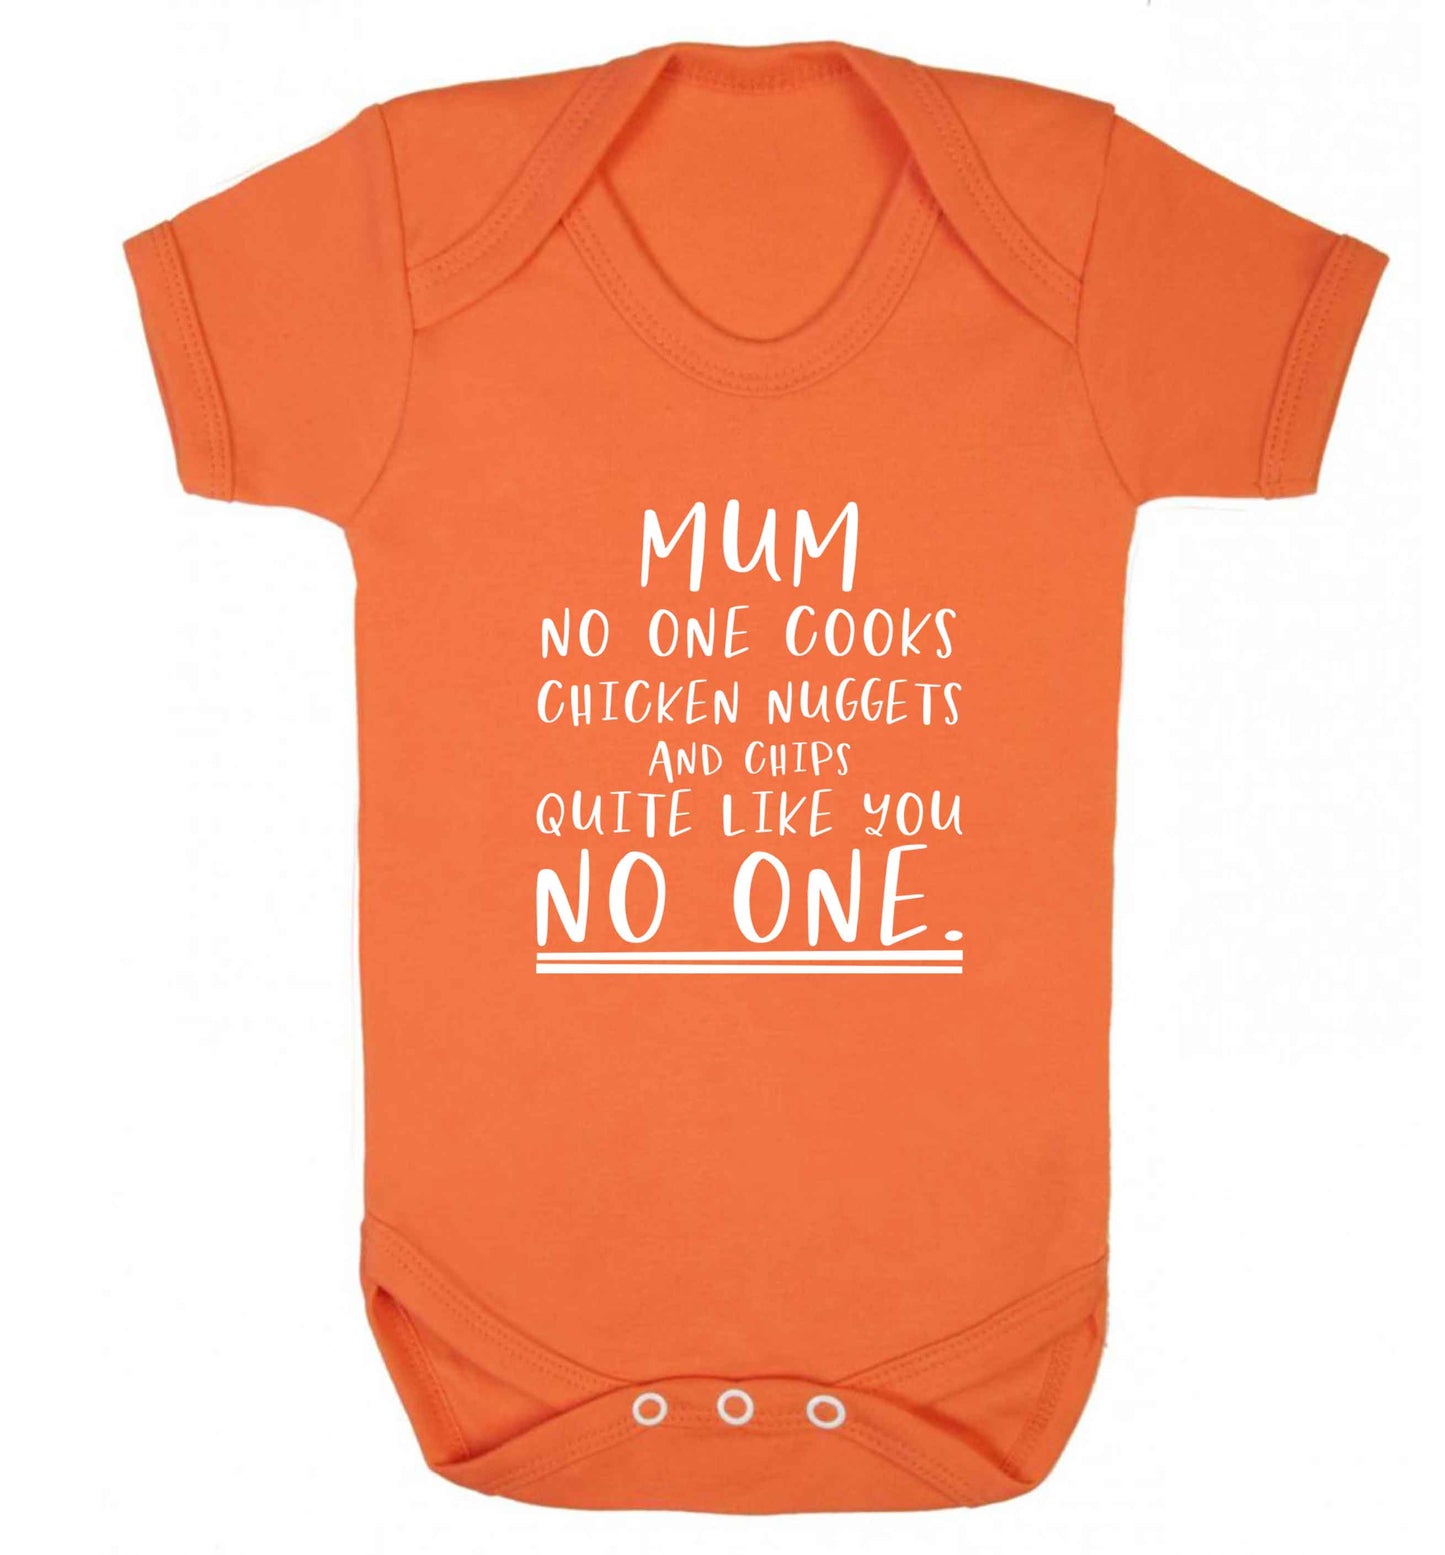 Super funny sassy gift for mother's day or birthday!  Mum no one cooks chicken nuggets and chips like you no one baby vest orange 18-24 months